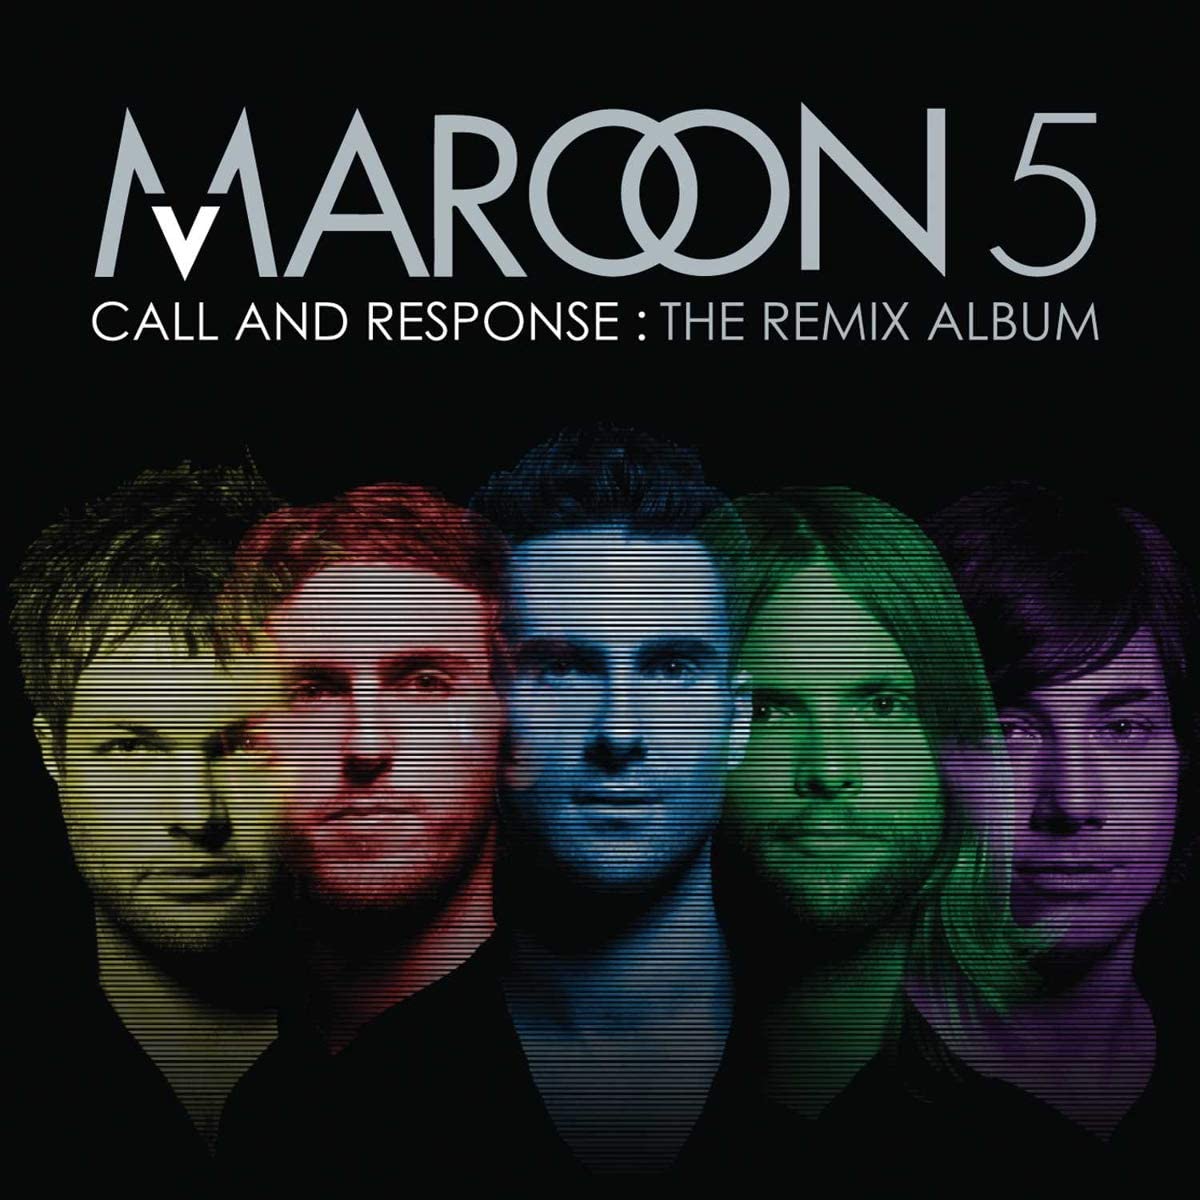 CD - MAROON 5 - CALL AND RESPONSE: THE REMIX ALBUM